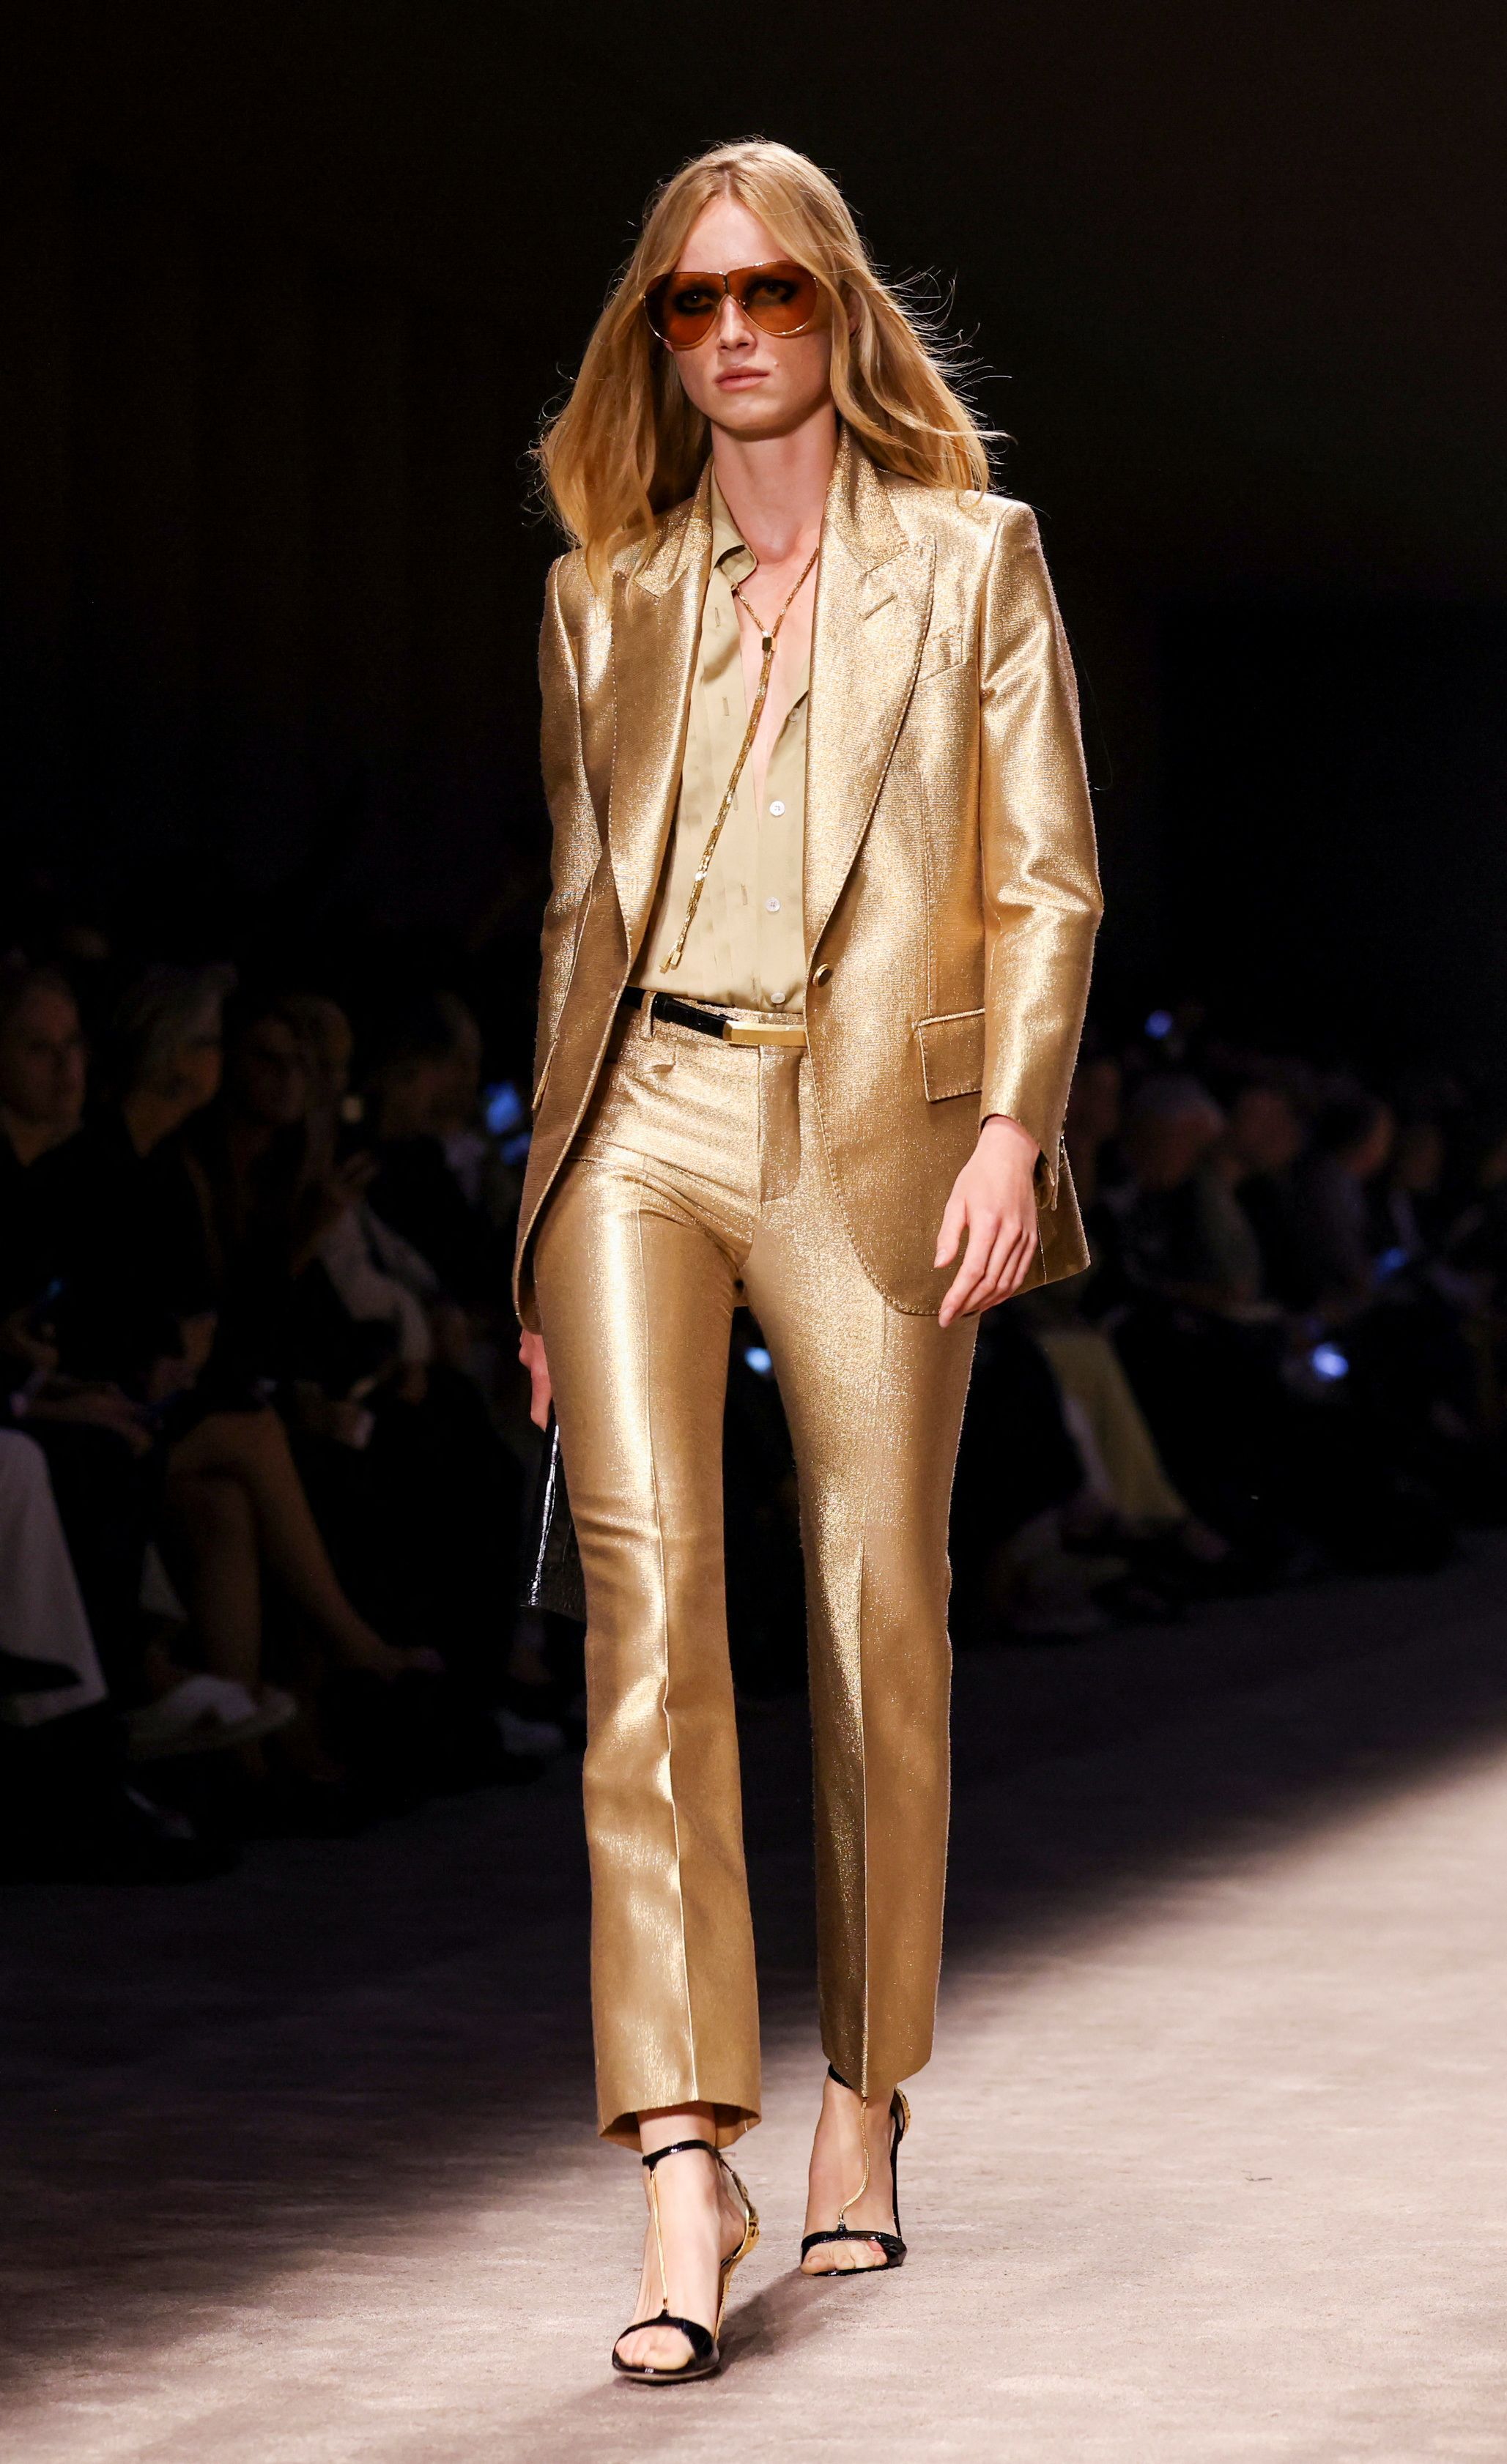 Tom Ford News, Collections, Fashion Shows, Fashion Week Reviews, and More